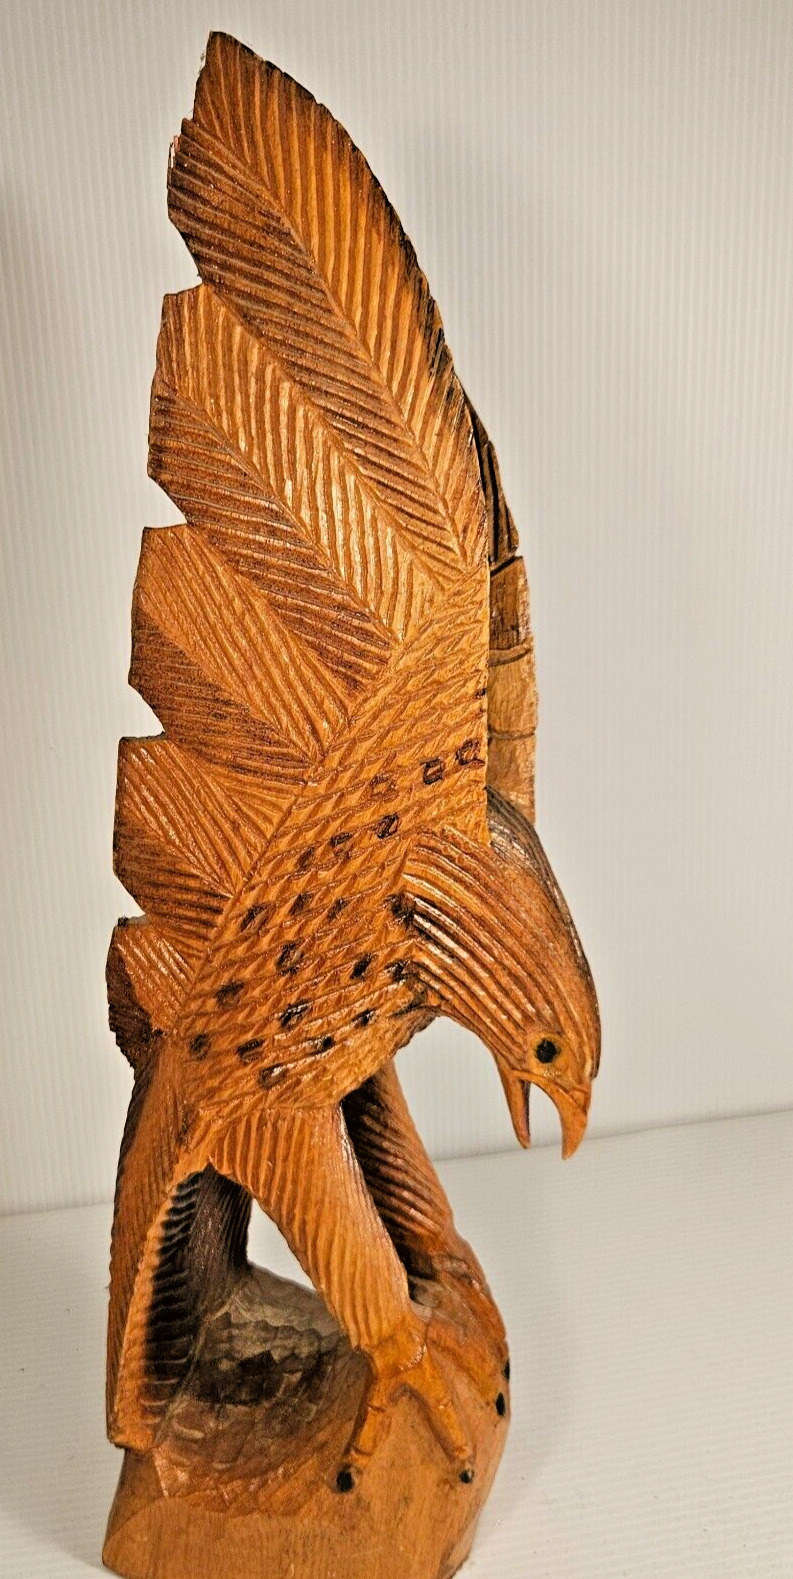 Hand Carved Wood Eagle Figure Statue 20 Inch